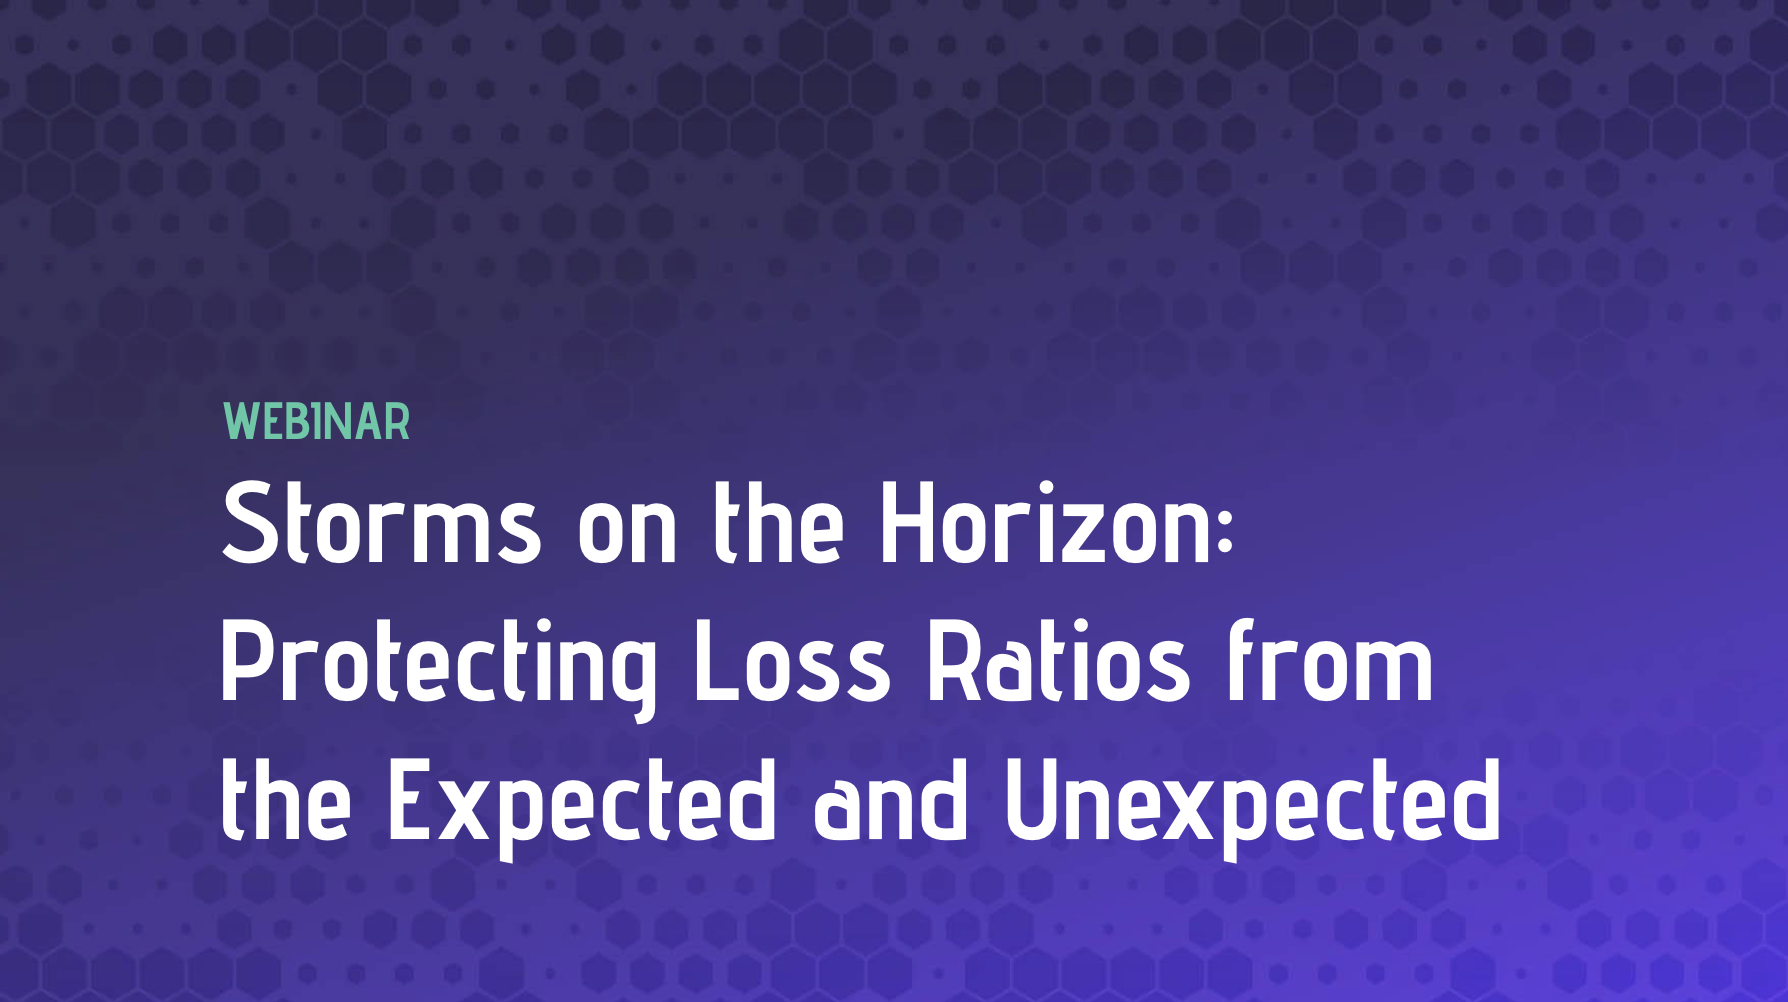 Storms on the Horizon: Protecting Loss Ratios from the Expected and Unexpected